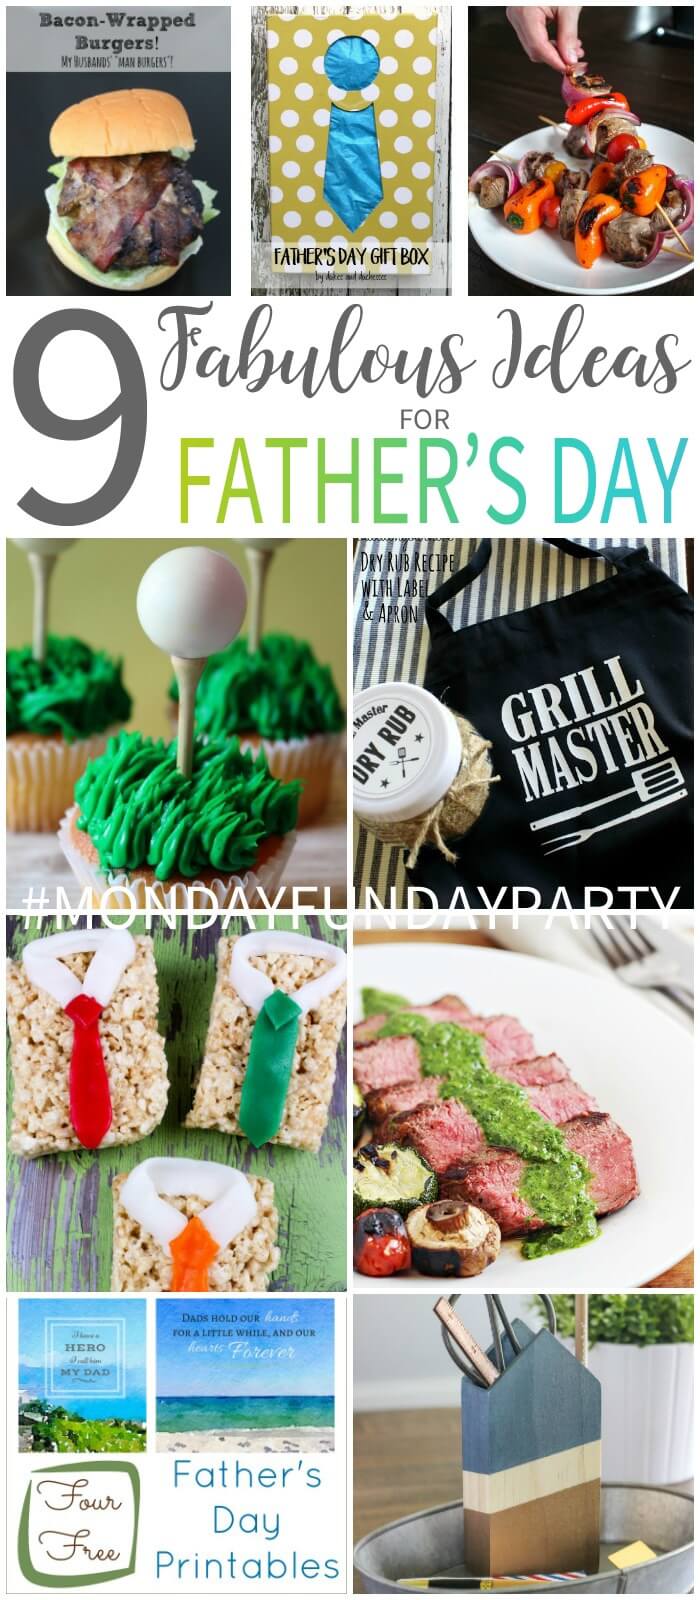 Father's Day Ideas at Monday Funday Link Party